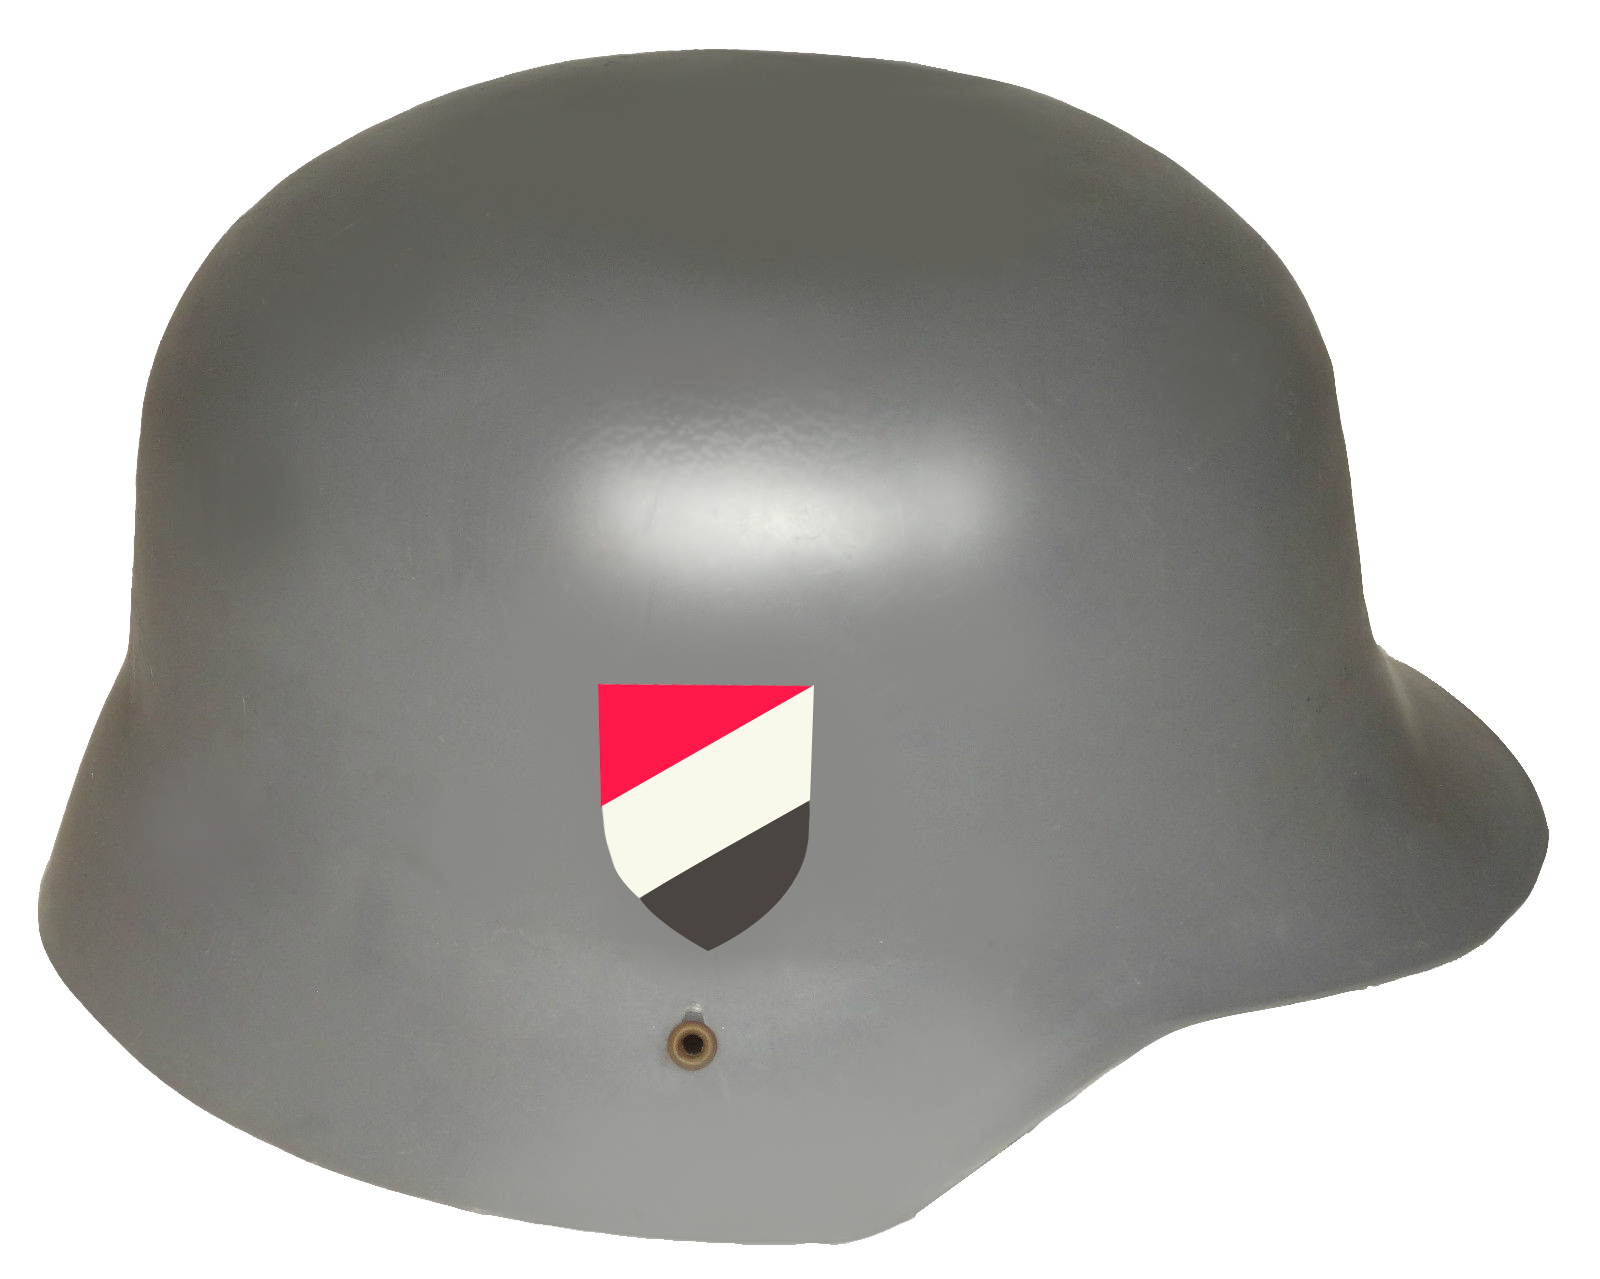  for free download. Nazi helmet png